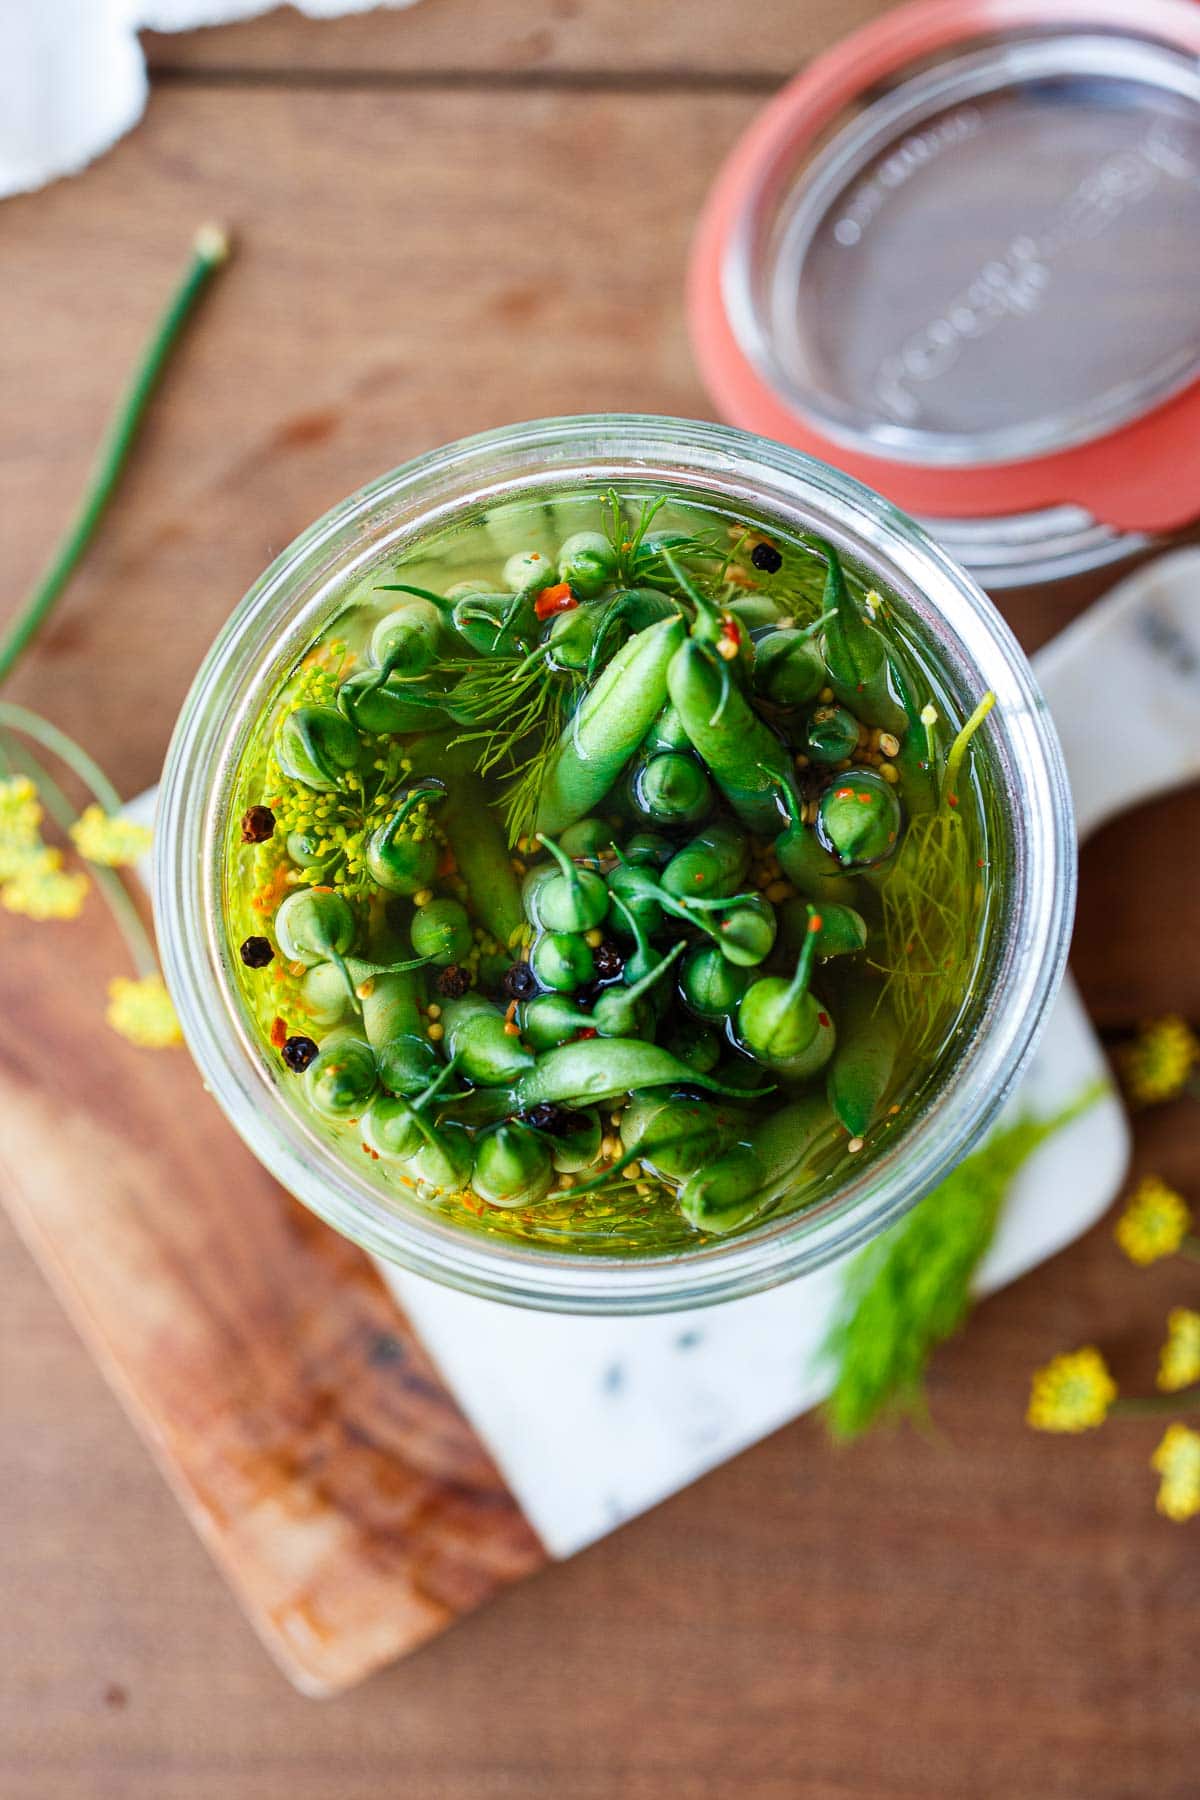 How to make Dilly Beans! This dilly beans recipe is quick and easy to make and full of tangy dill and garlic flavor.  Crisp and fresh pickled green beans are a tasty way to preserve them and make for a beautiful gift. 